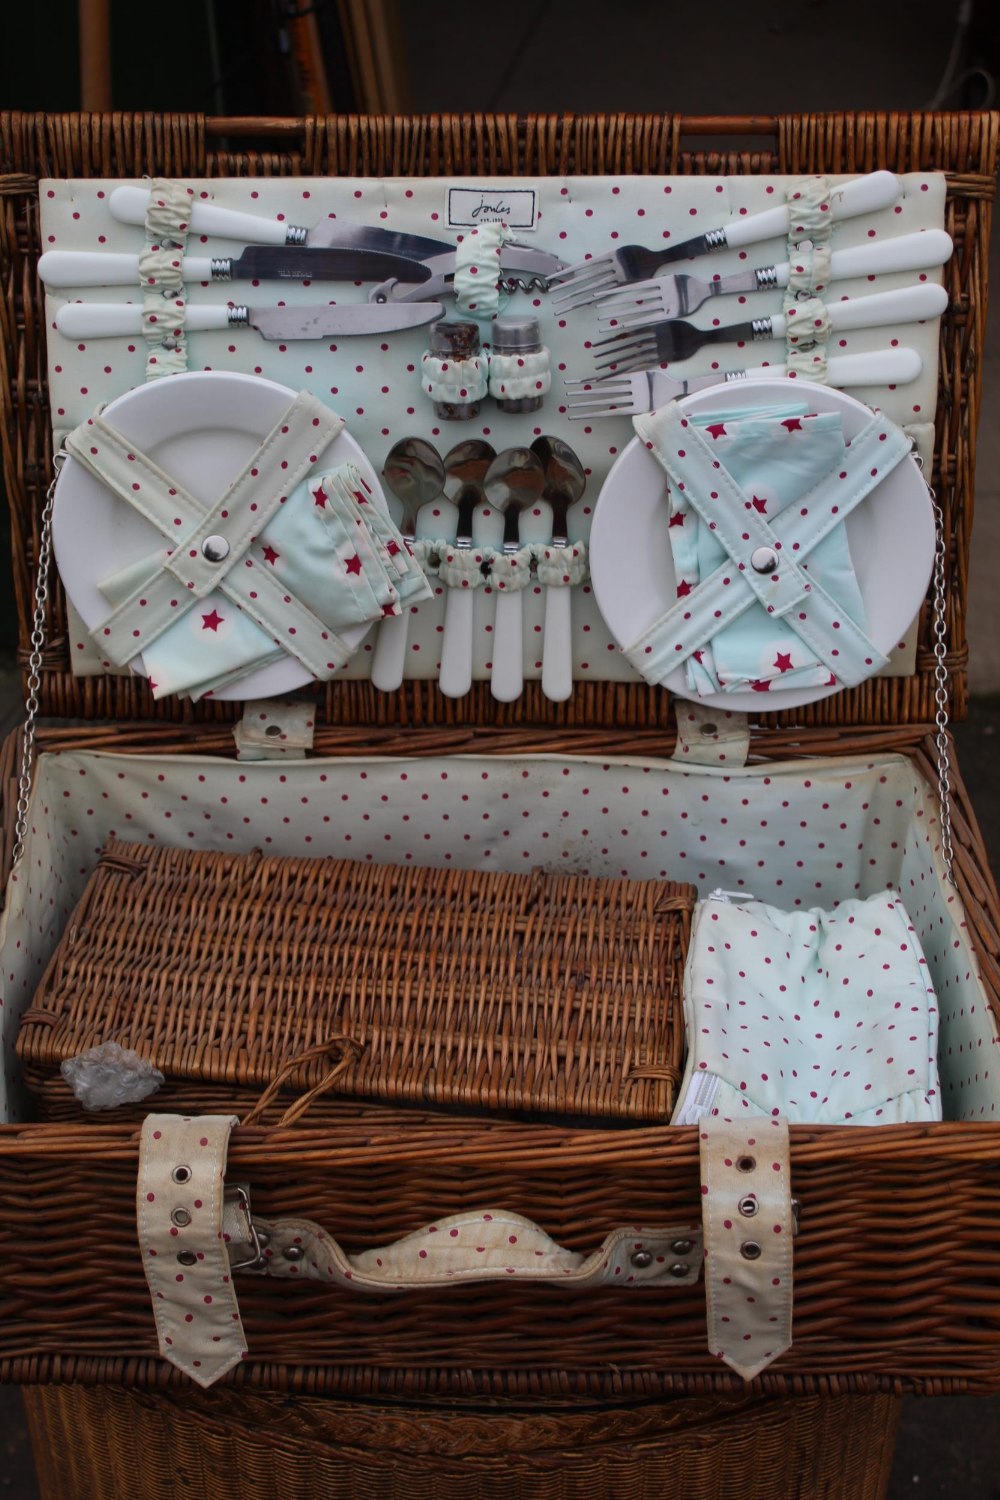 Rectangular wicker Joules picnic hamper complete with various accessories, additional wicker basket,